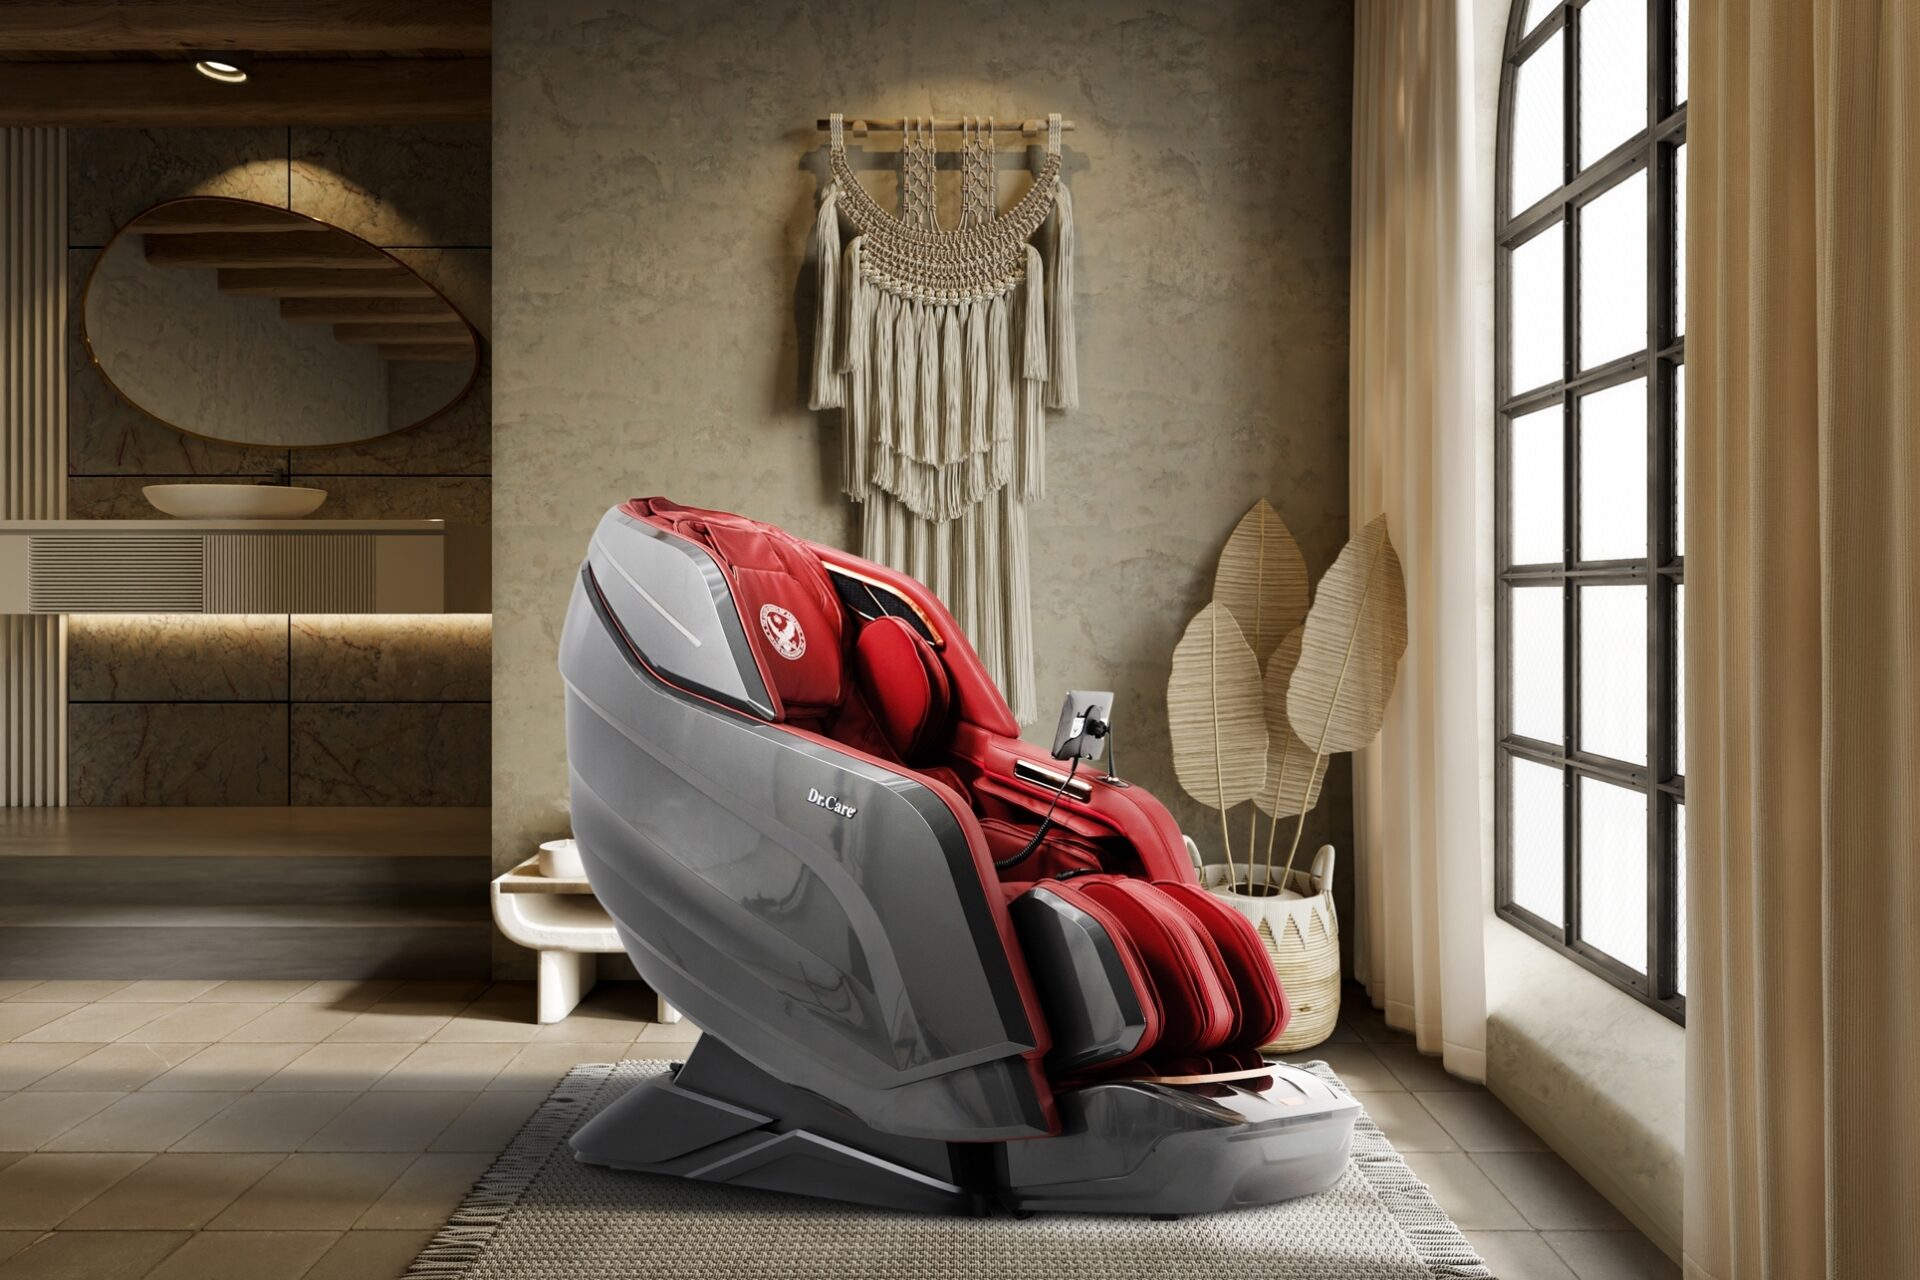 Dr.Care DR-XR 929S full-body massage chair